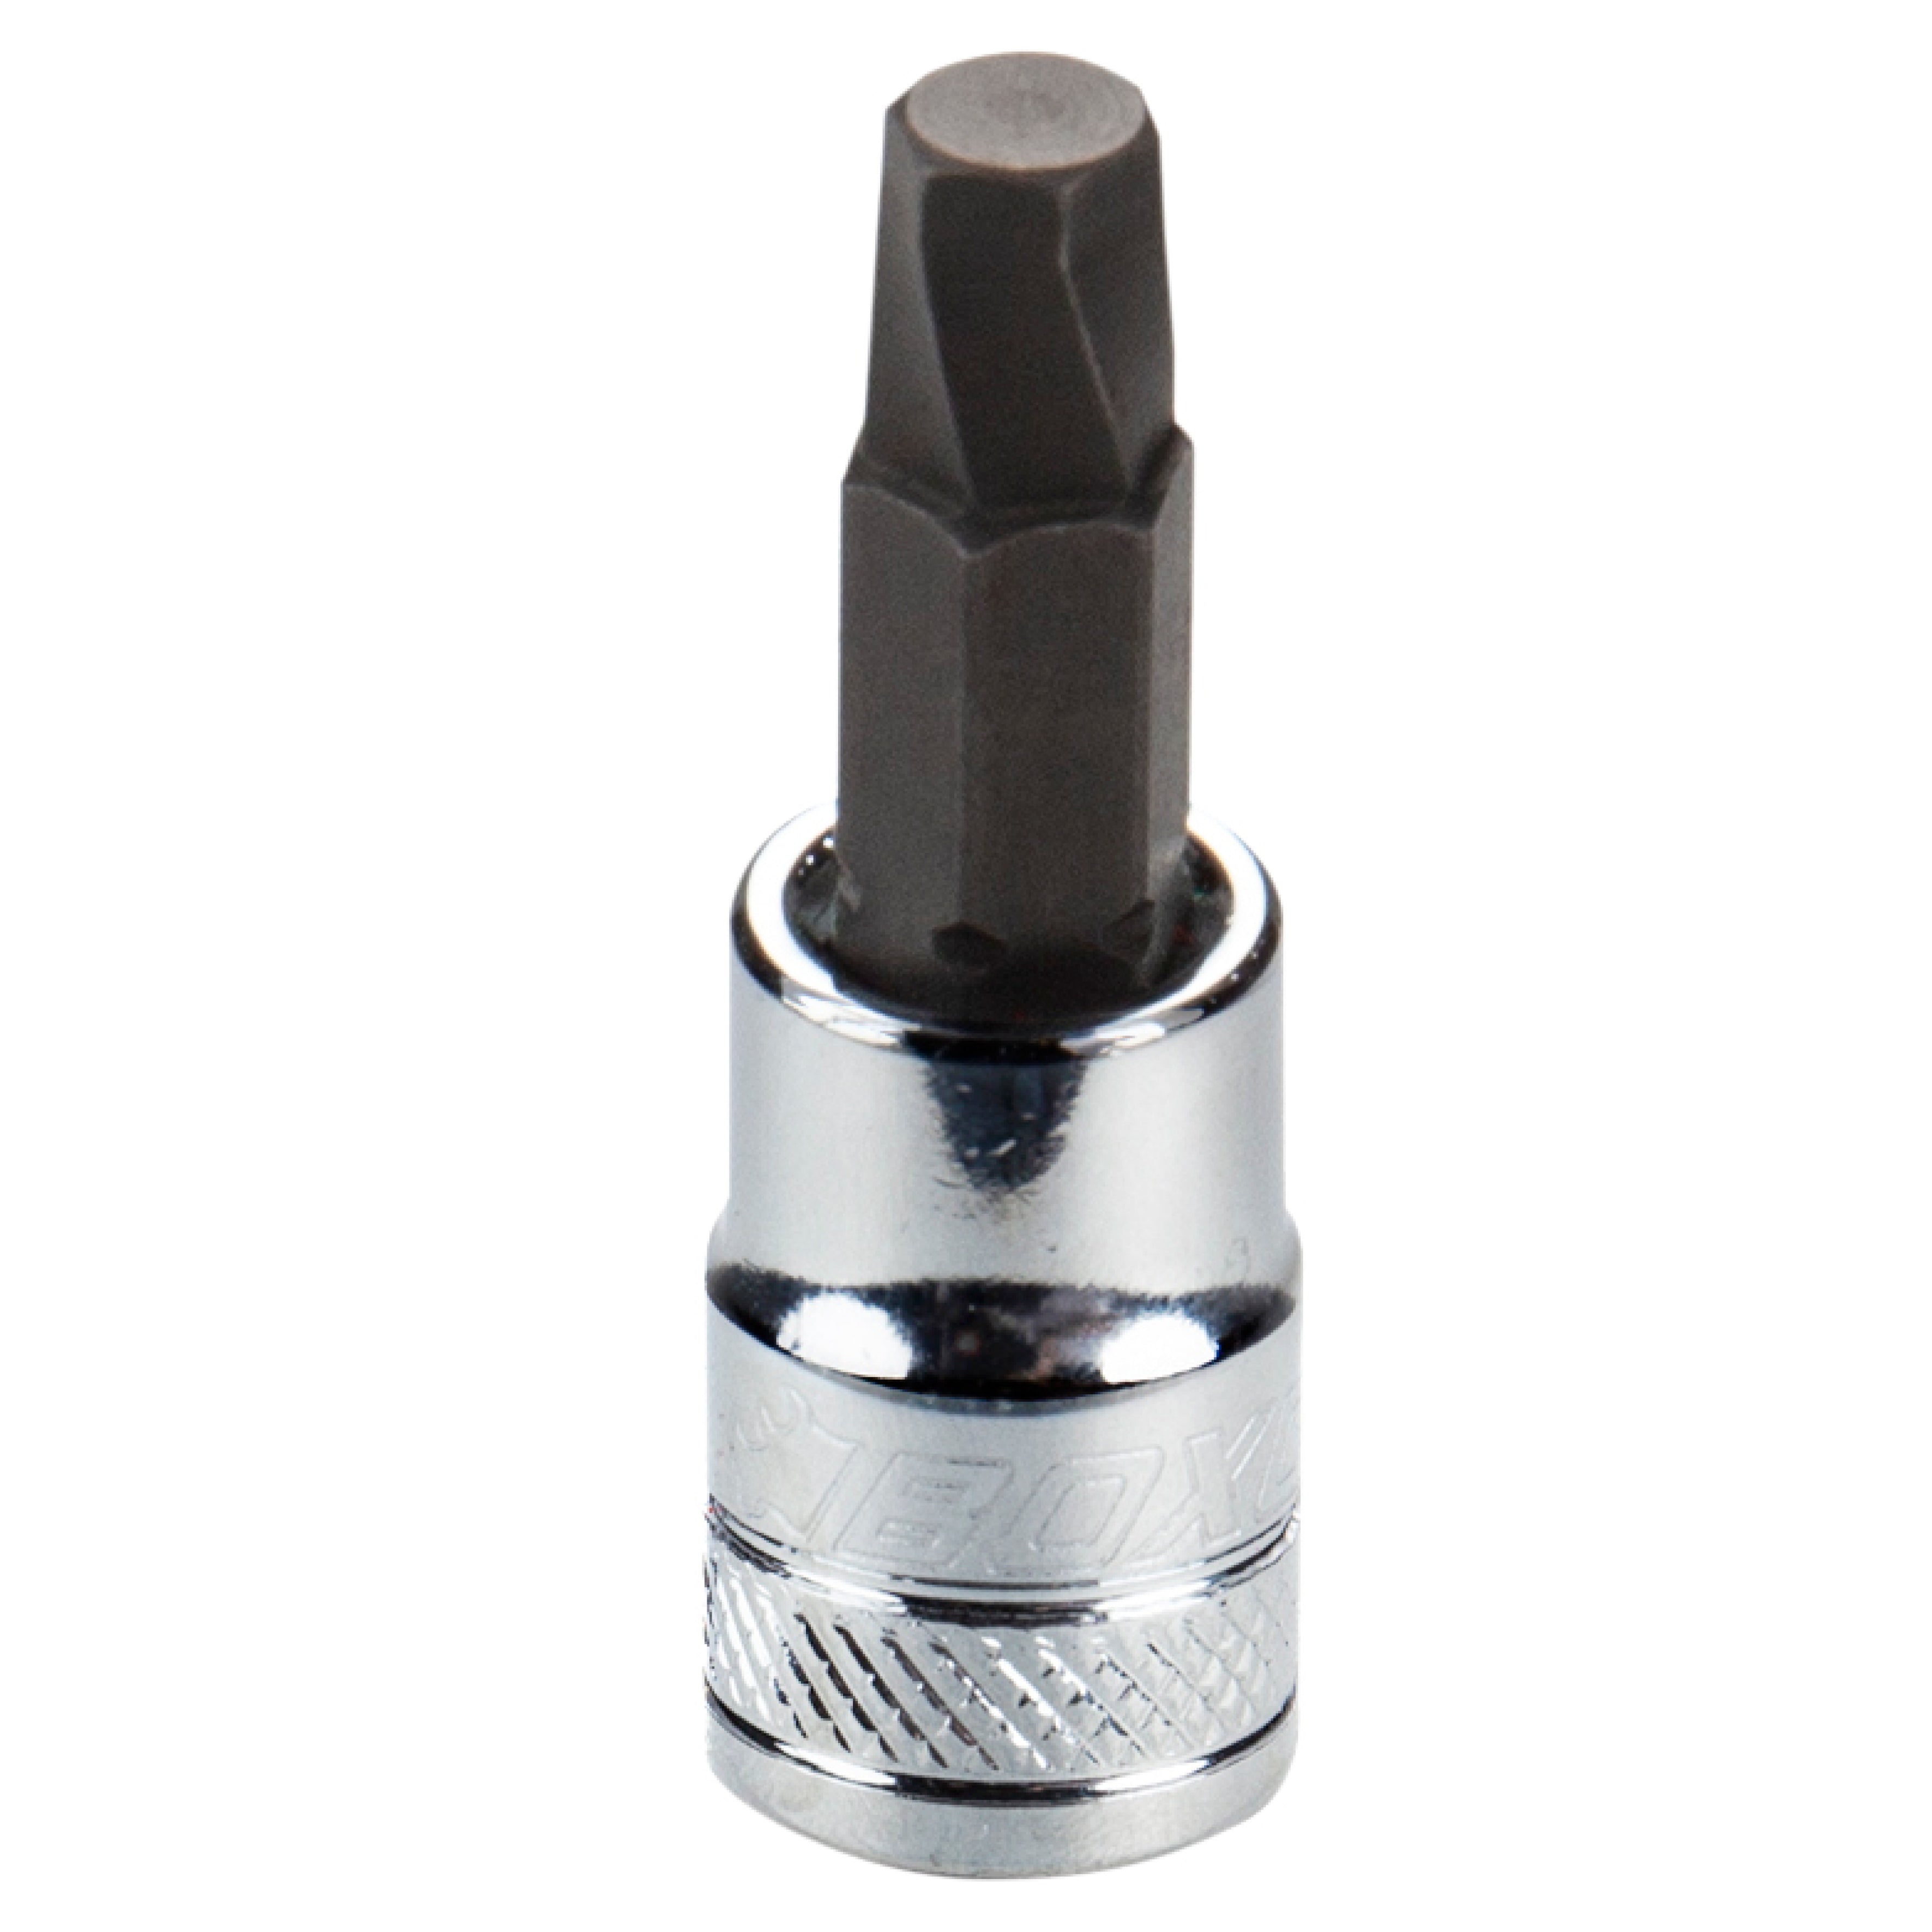 BOXO 3/8" Hex Extractor Bit Sockets - Sizes H7 or H8